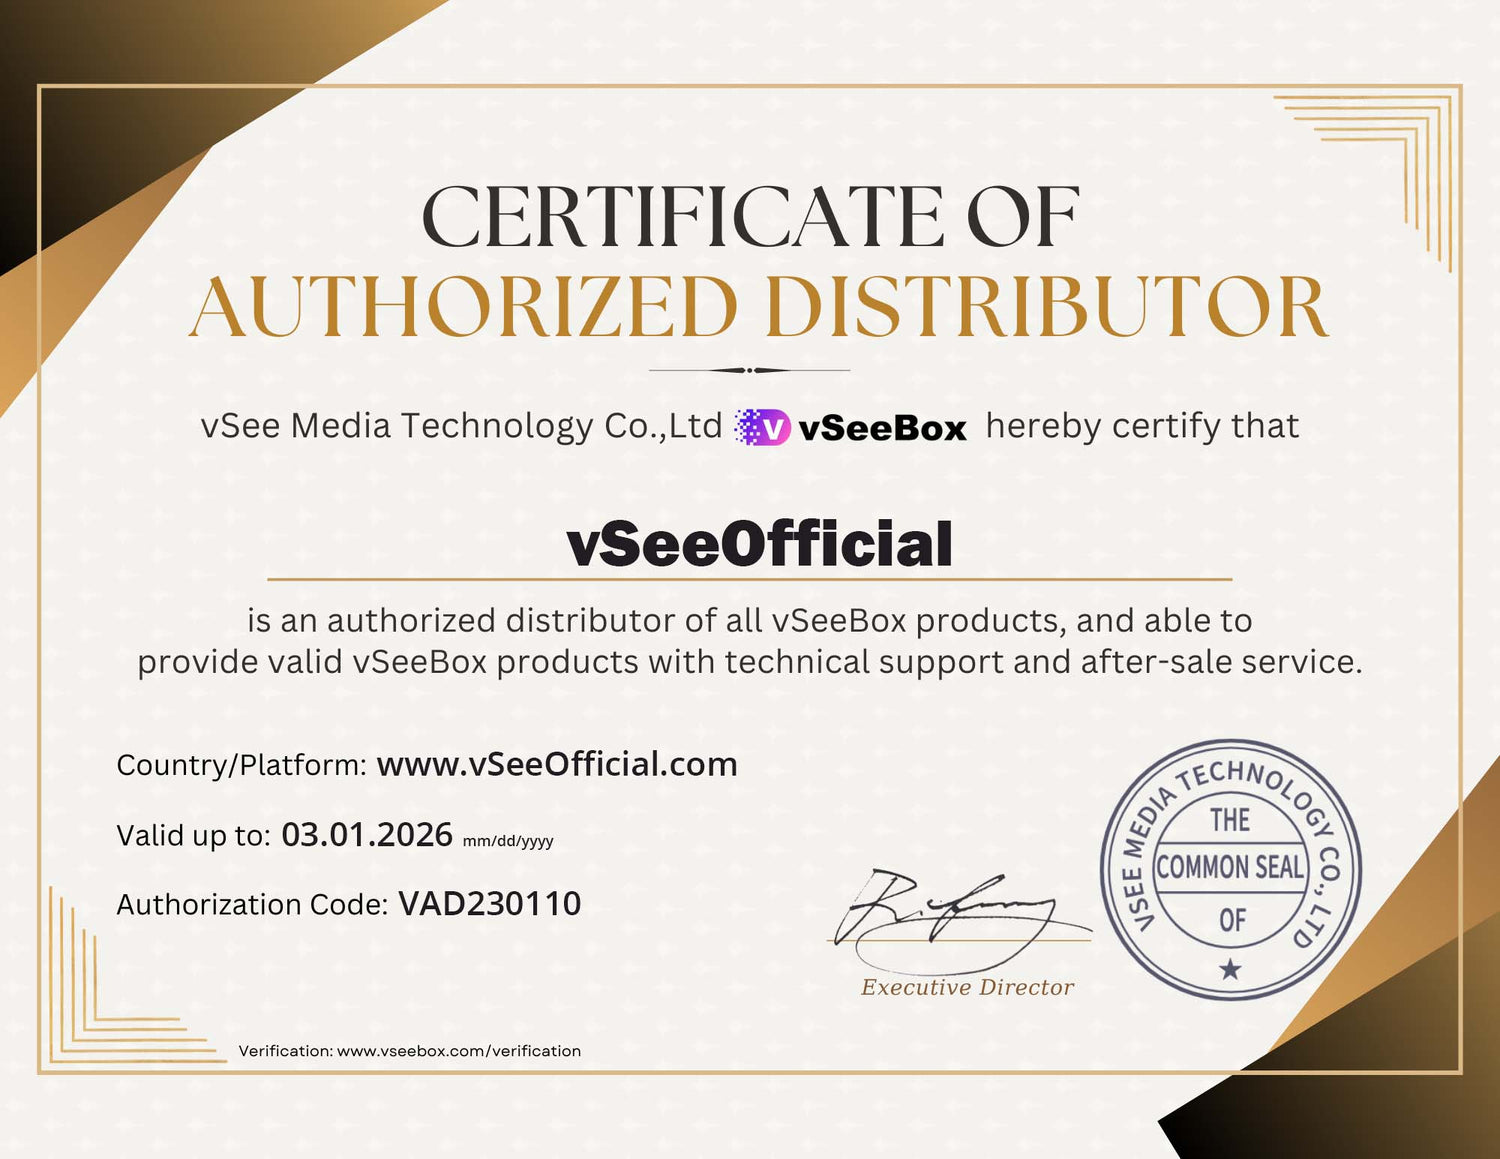 vSeeBox vSeeOfficial certificate of authorized distributor